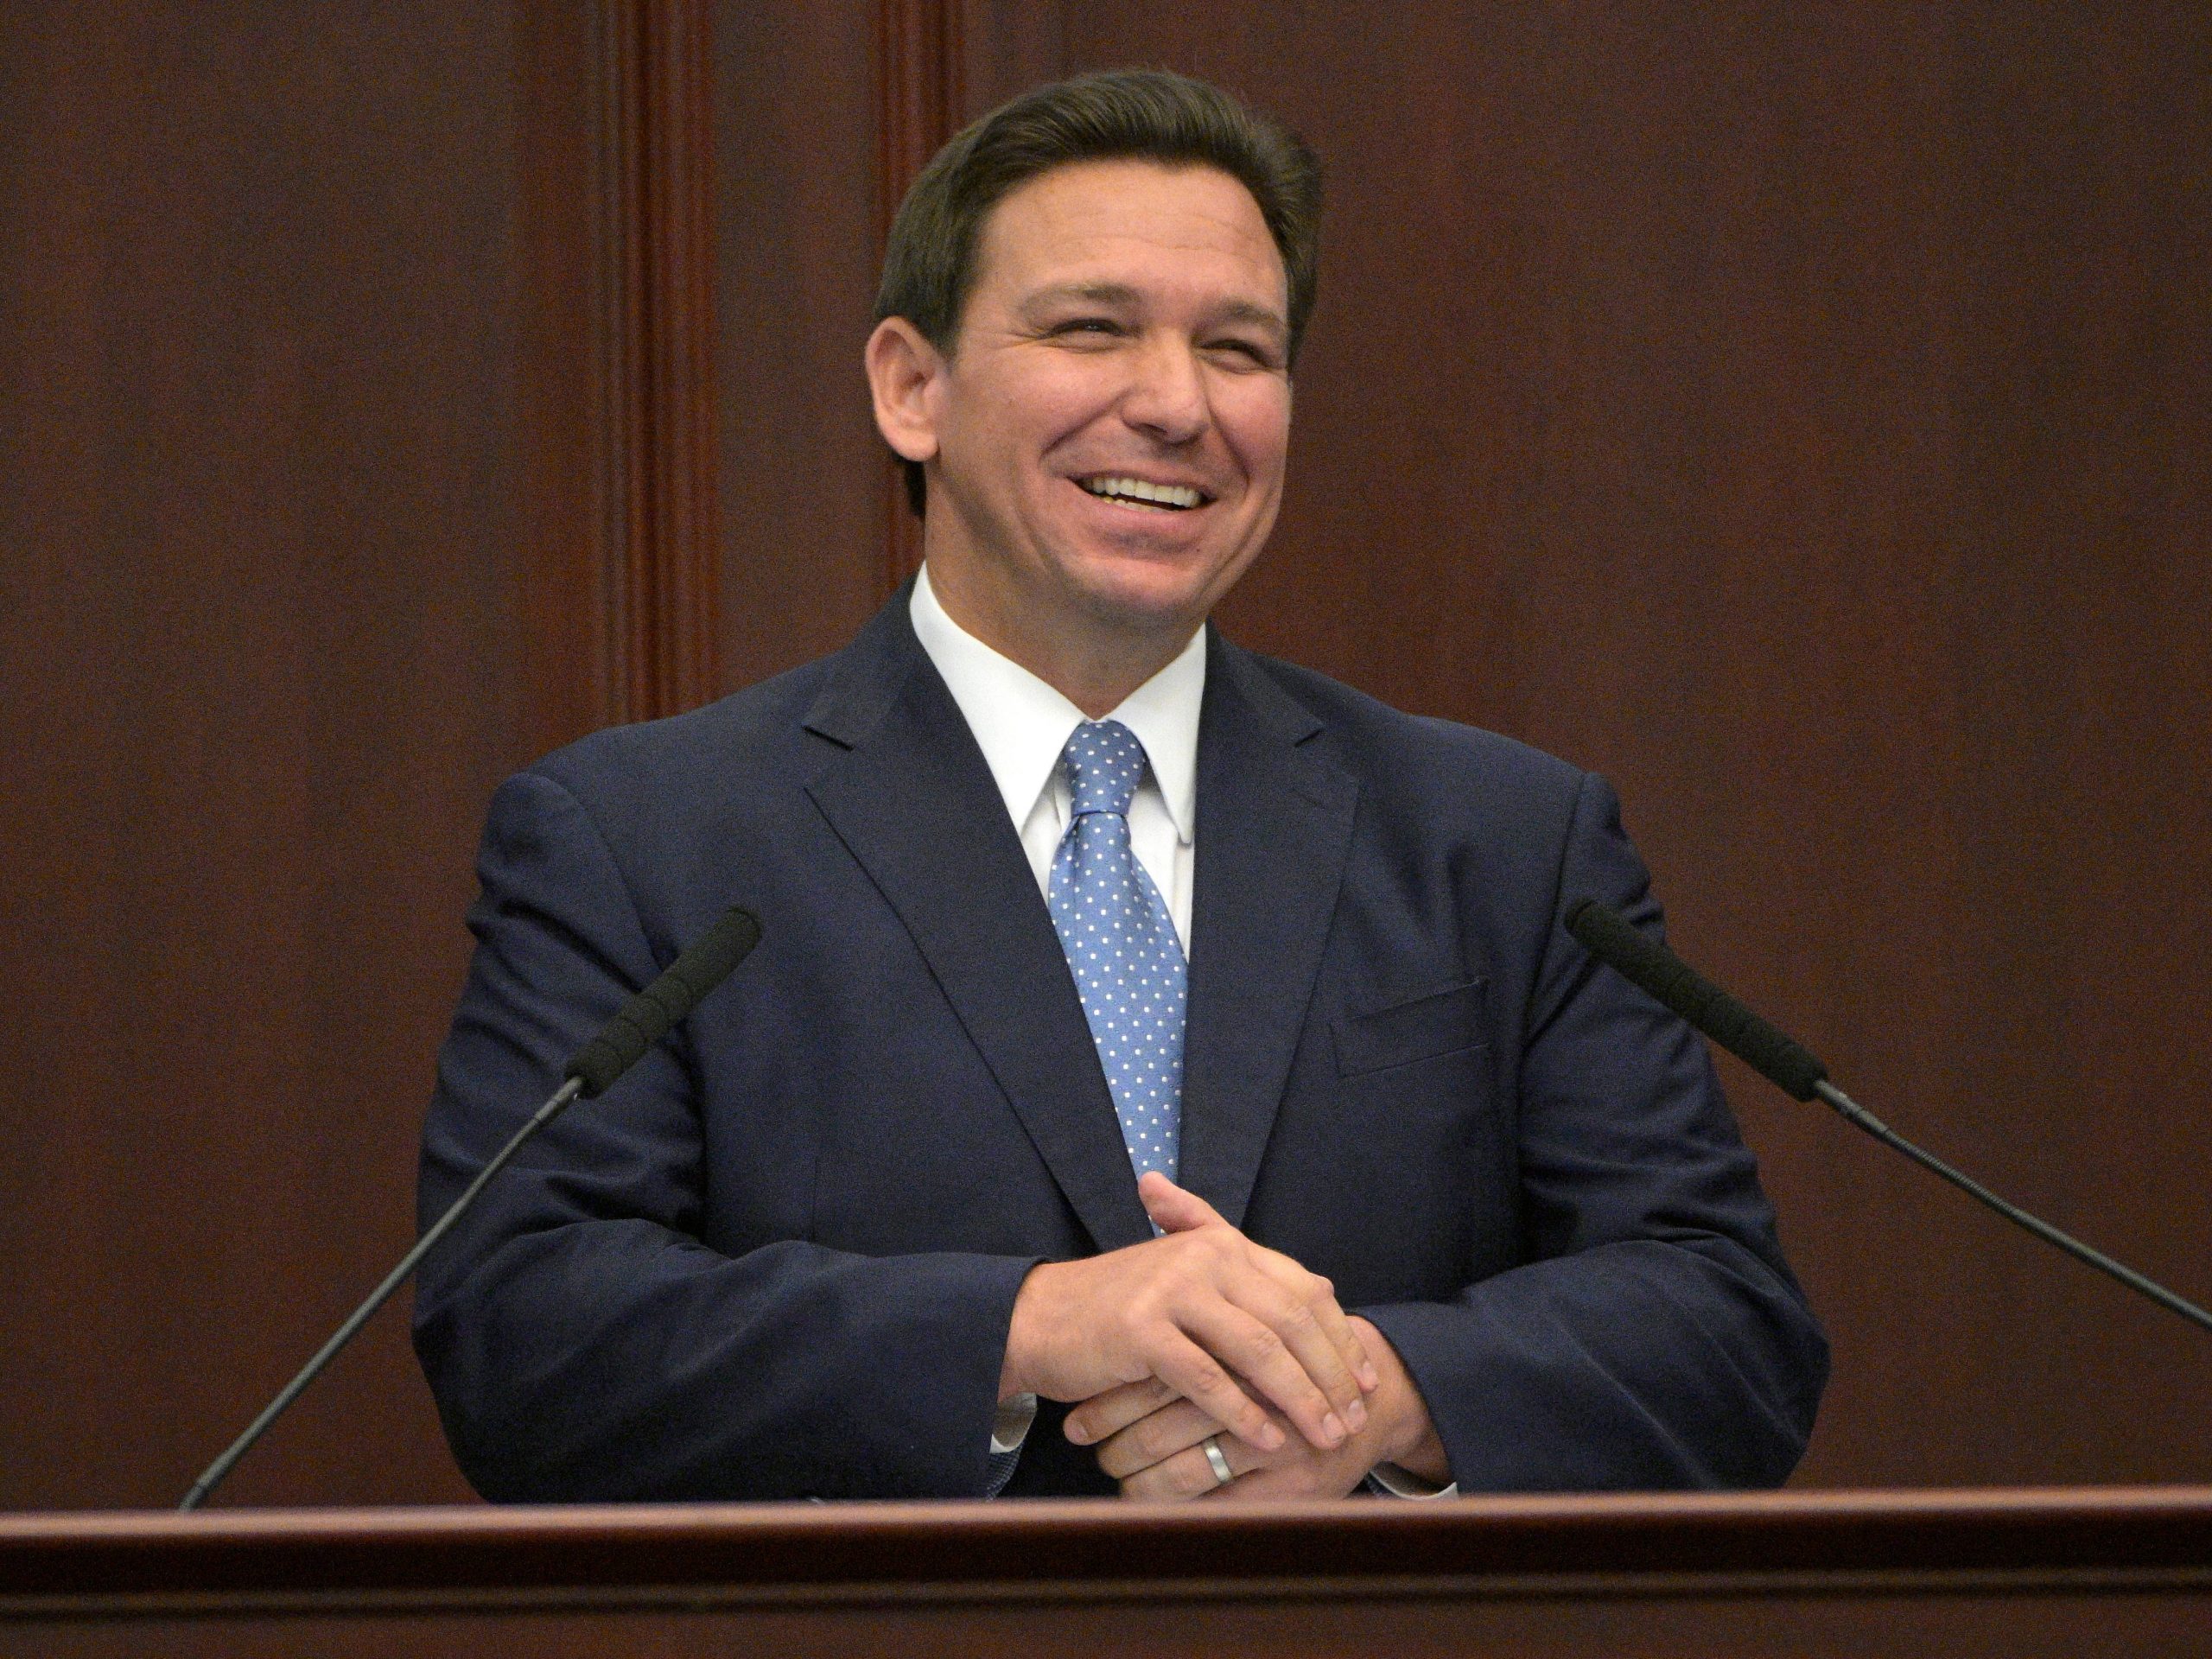 Florida Gov. Ron DeSantis addresses a joint session of the legislature, Tuesday, Jan. 11, 2022, in Tallahassee, Fla.